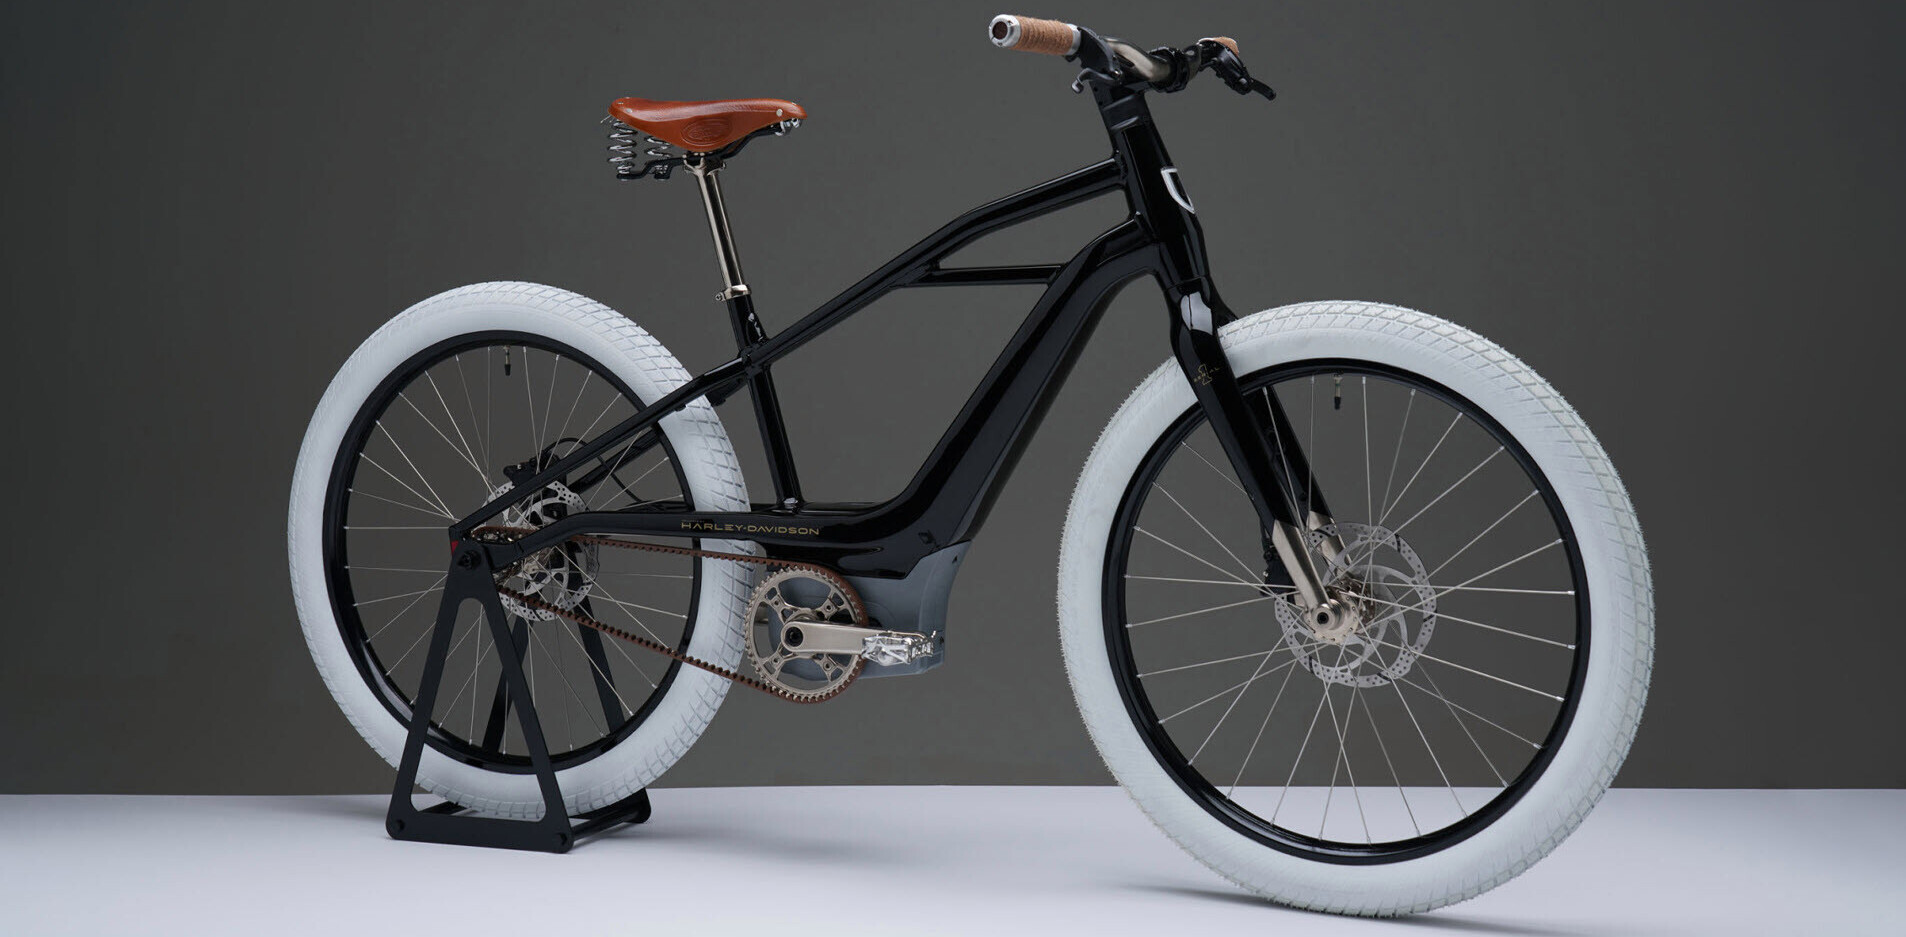 Harley-Davidson reveals its new ebike brand: Serial 1 Cycle Company